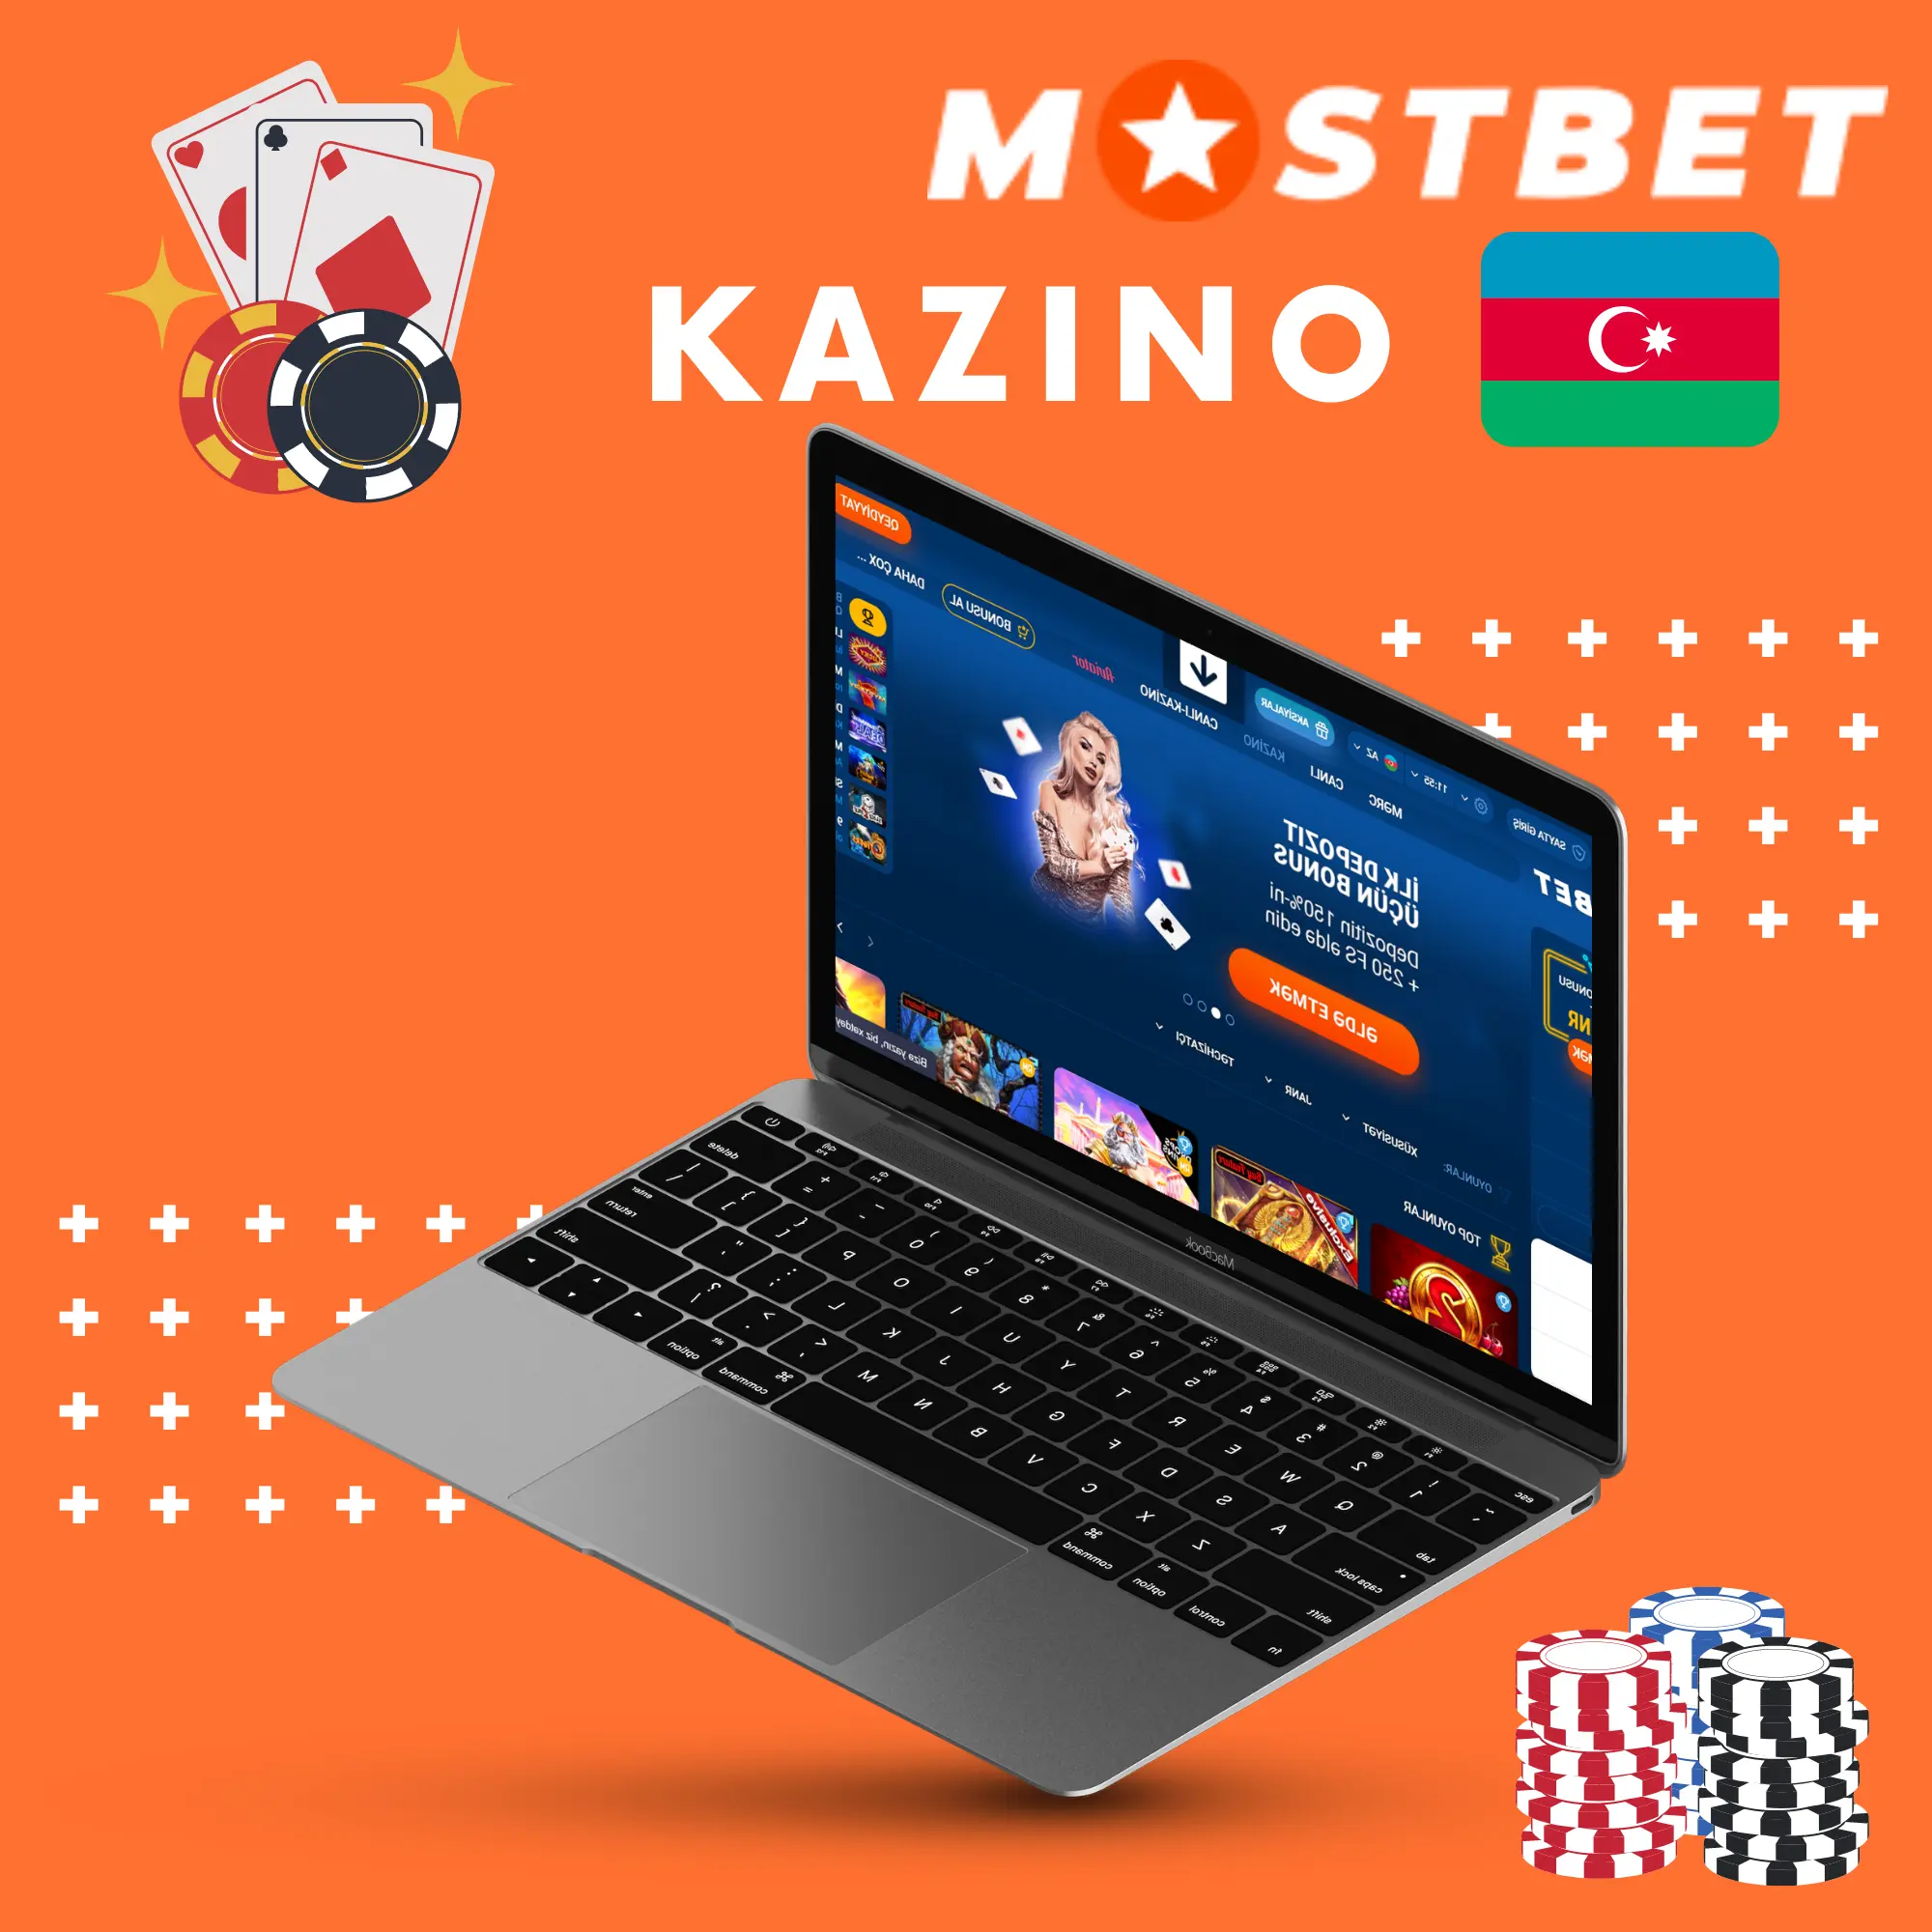 Getting The Best Software To Power Up Your Bookmaker Mostbet and online casino in Kazakhstan